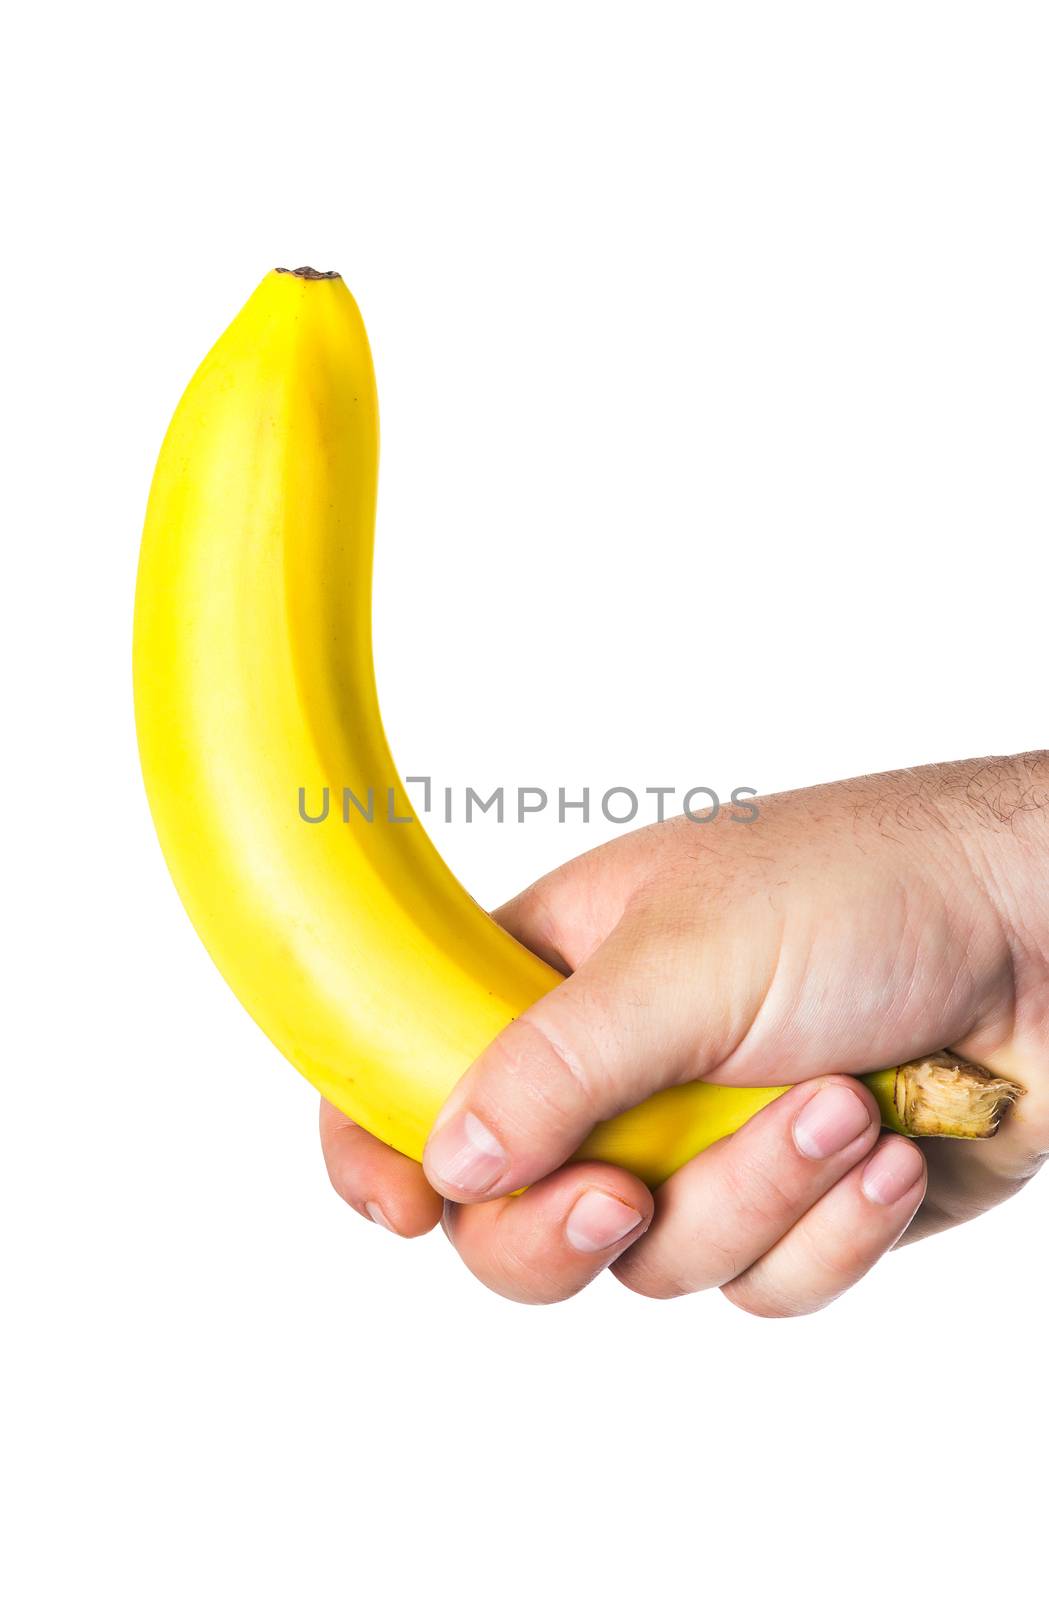 man's hand holding a banana like a big penis that symbolizes erection and potency